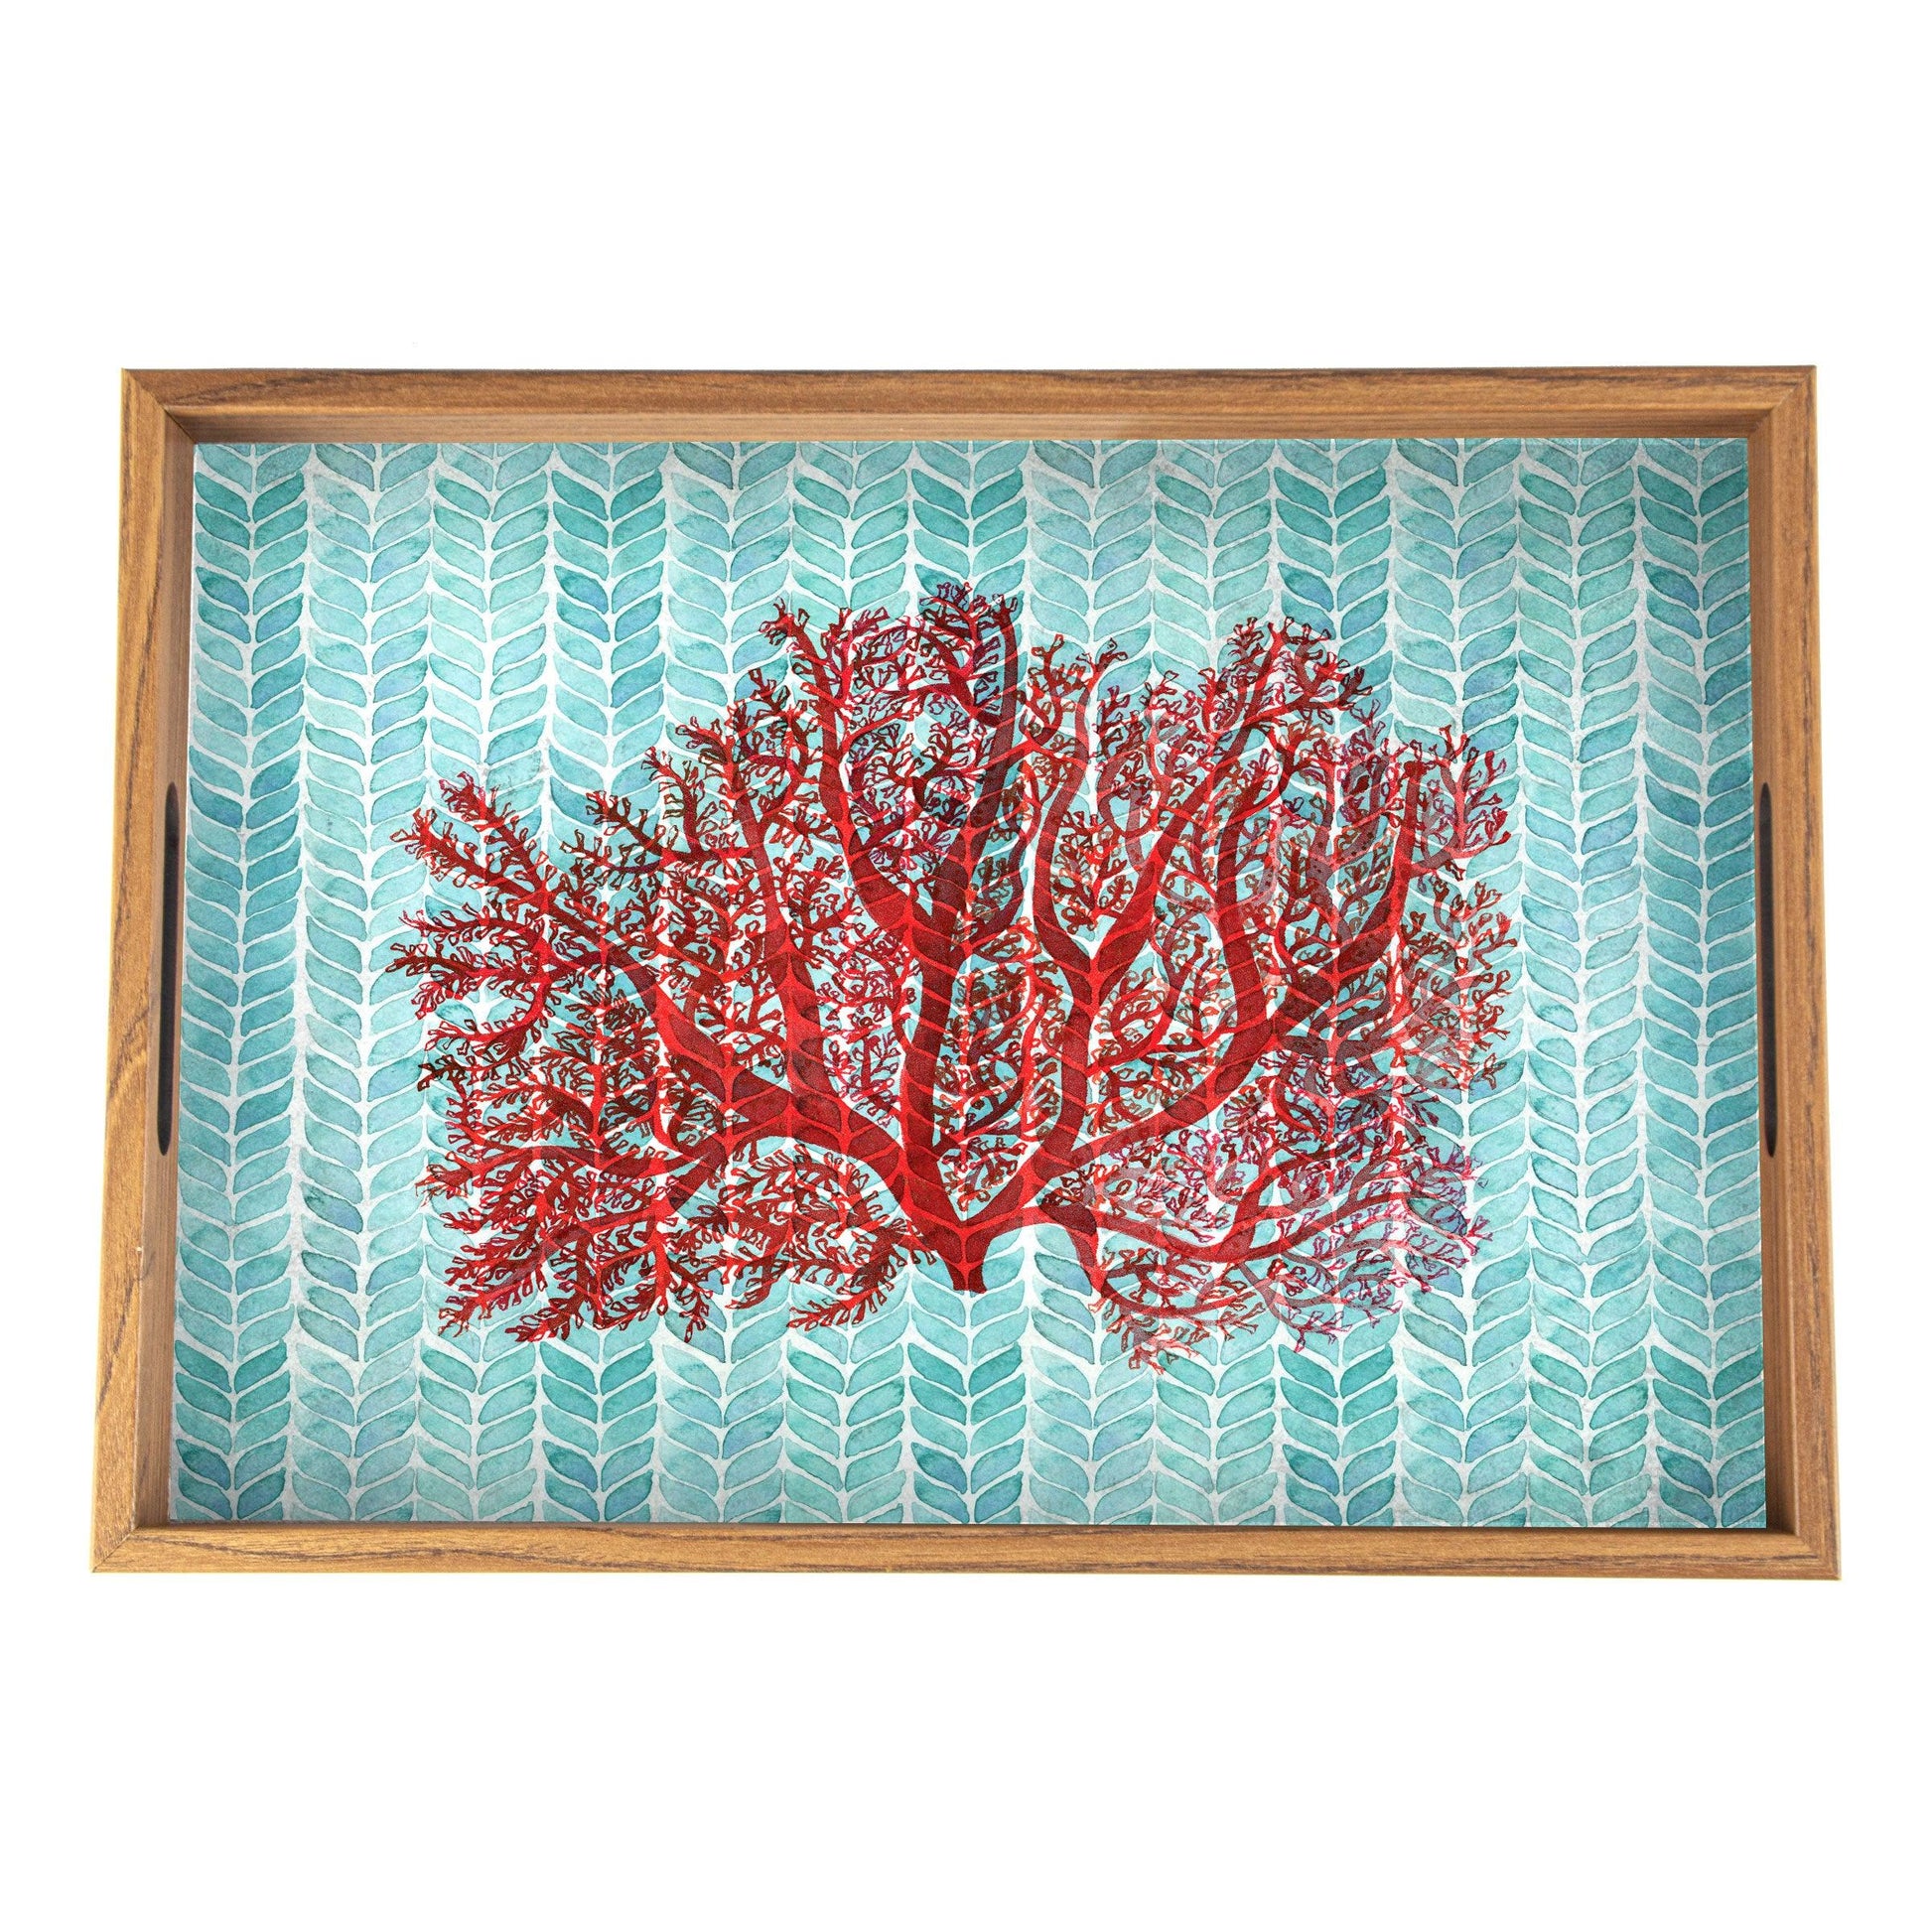 WOODEN TRAY with printed design - CORAL - LAZADO